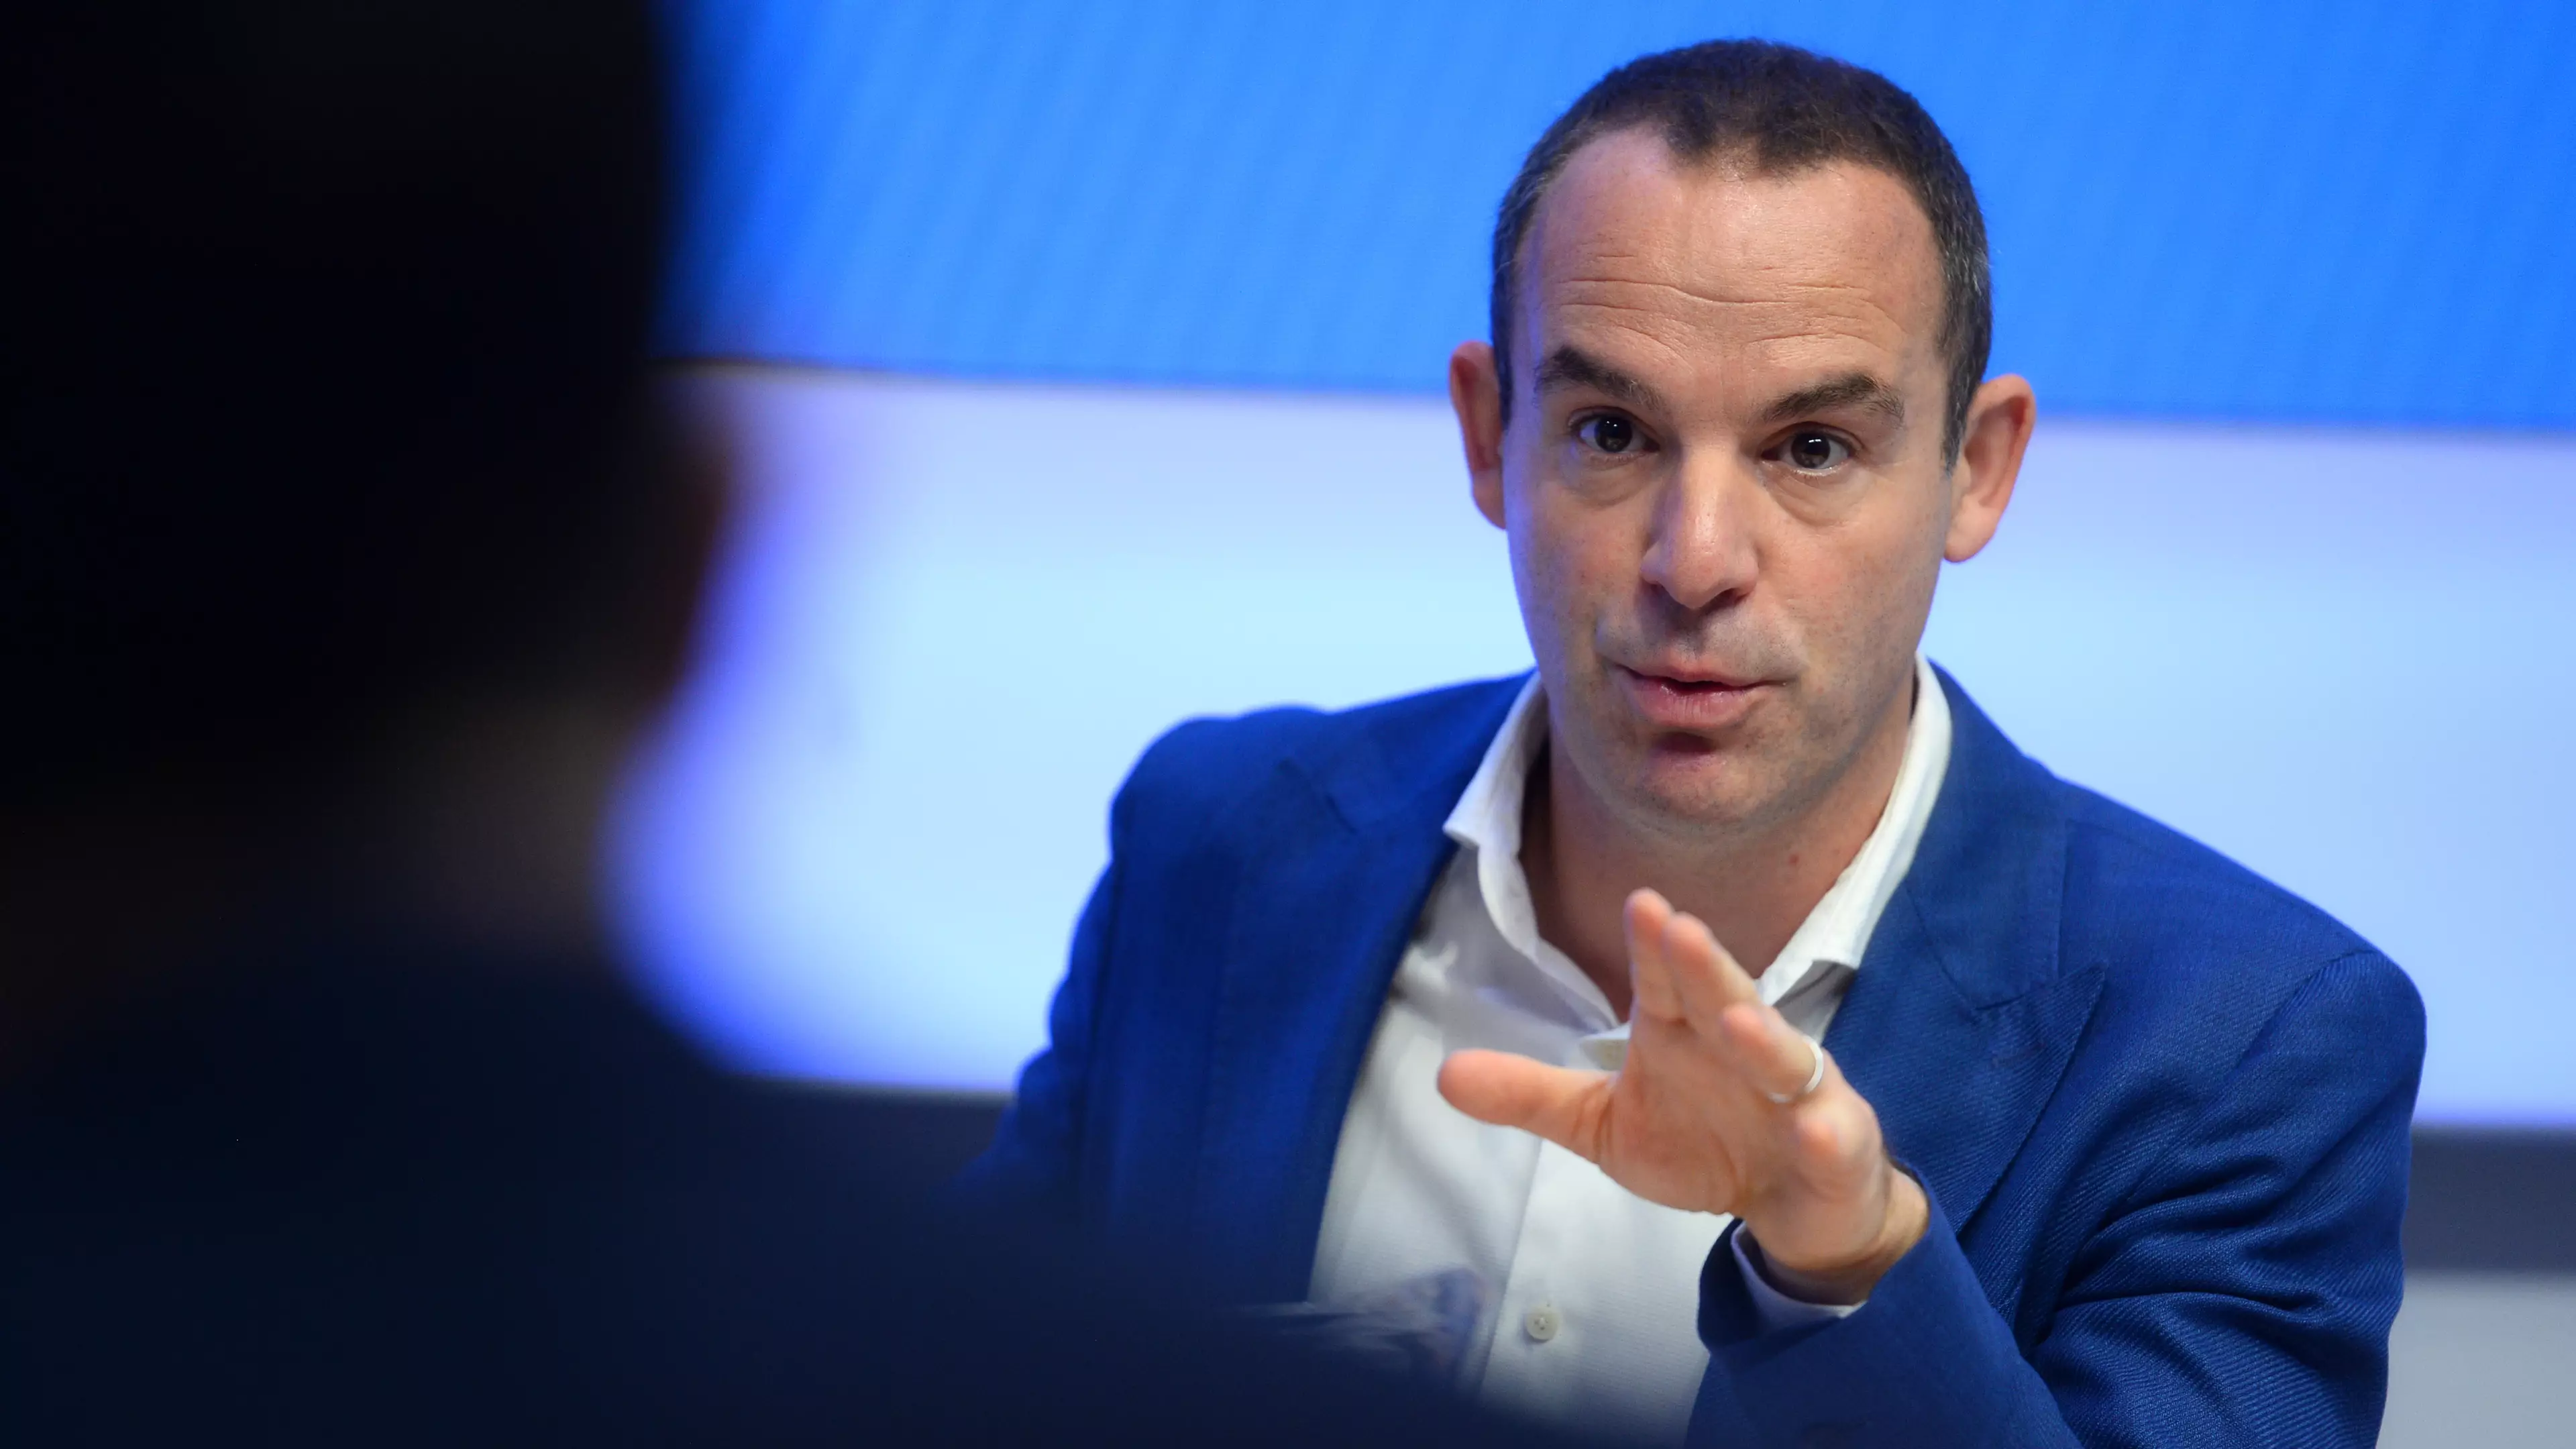 Martin Lewis Reveals He's Donated Nearly £20 Million To Charity In Eight Years